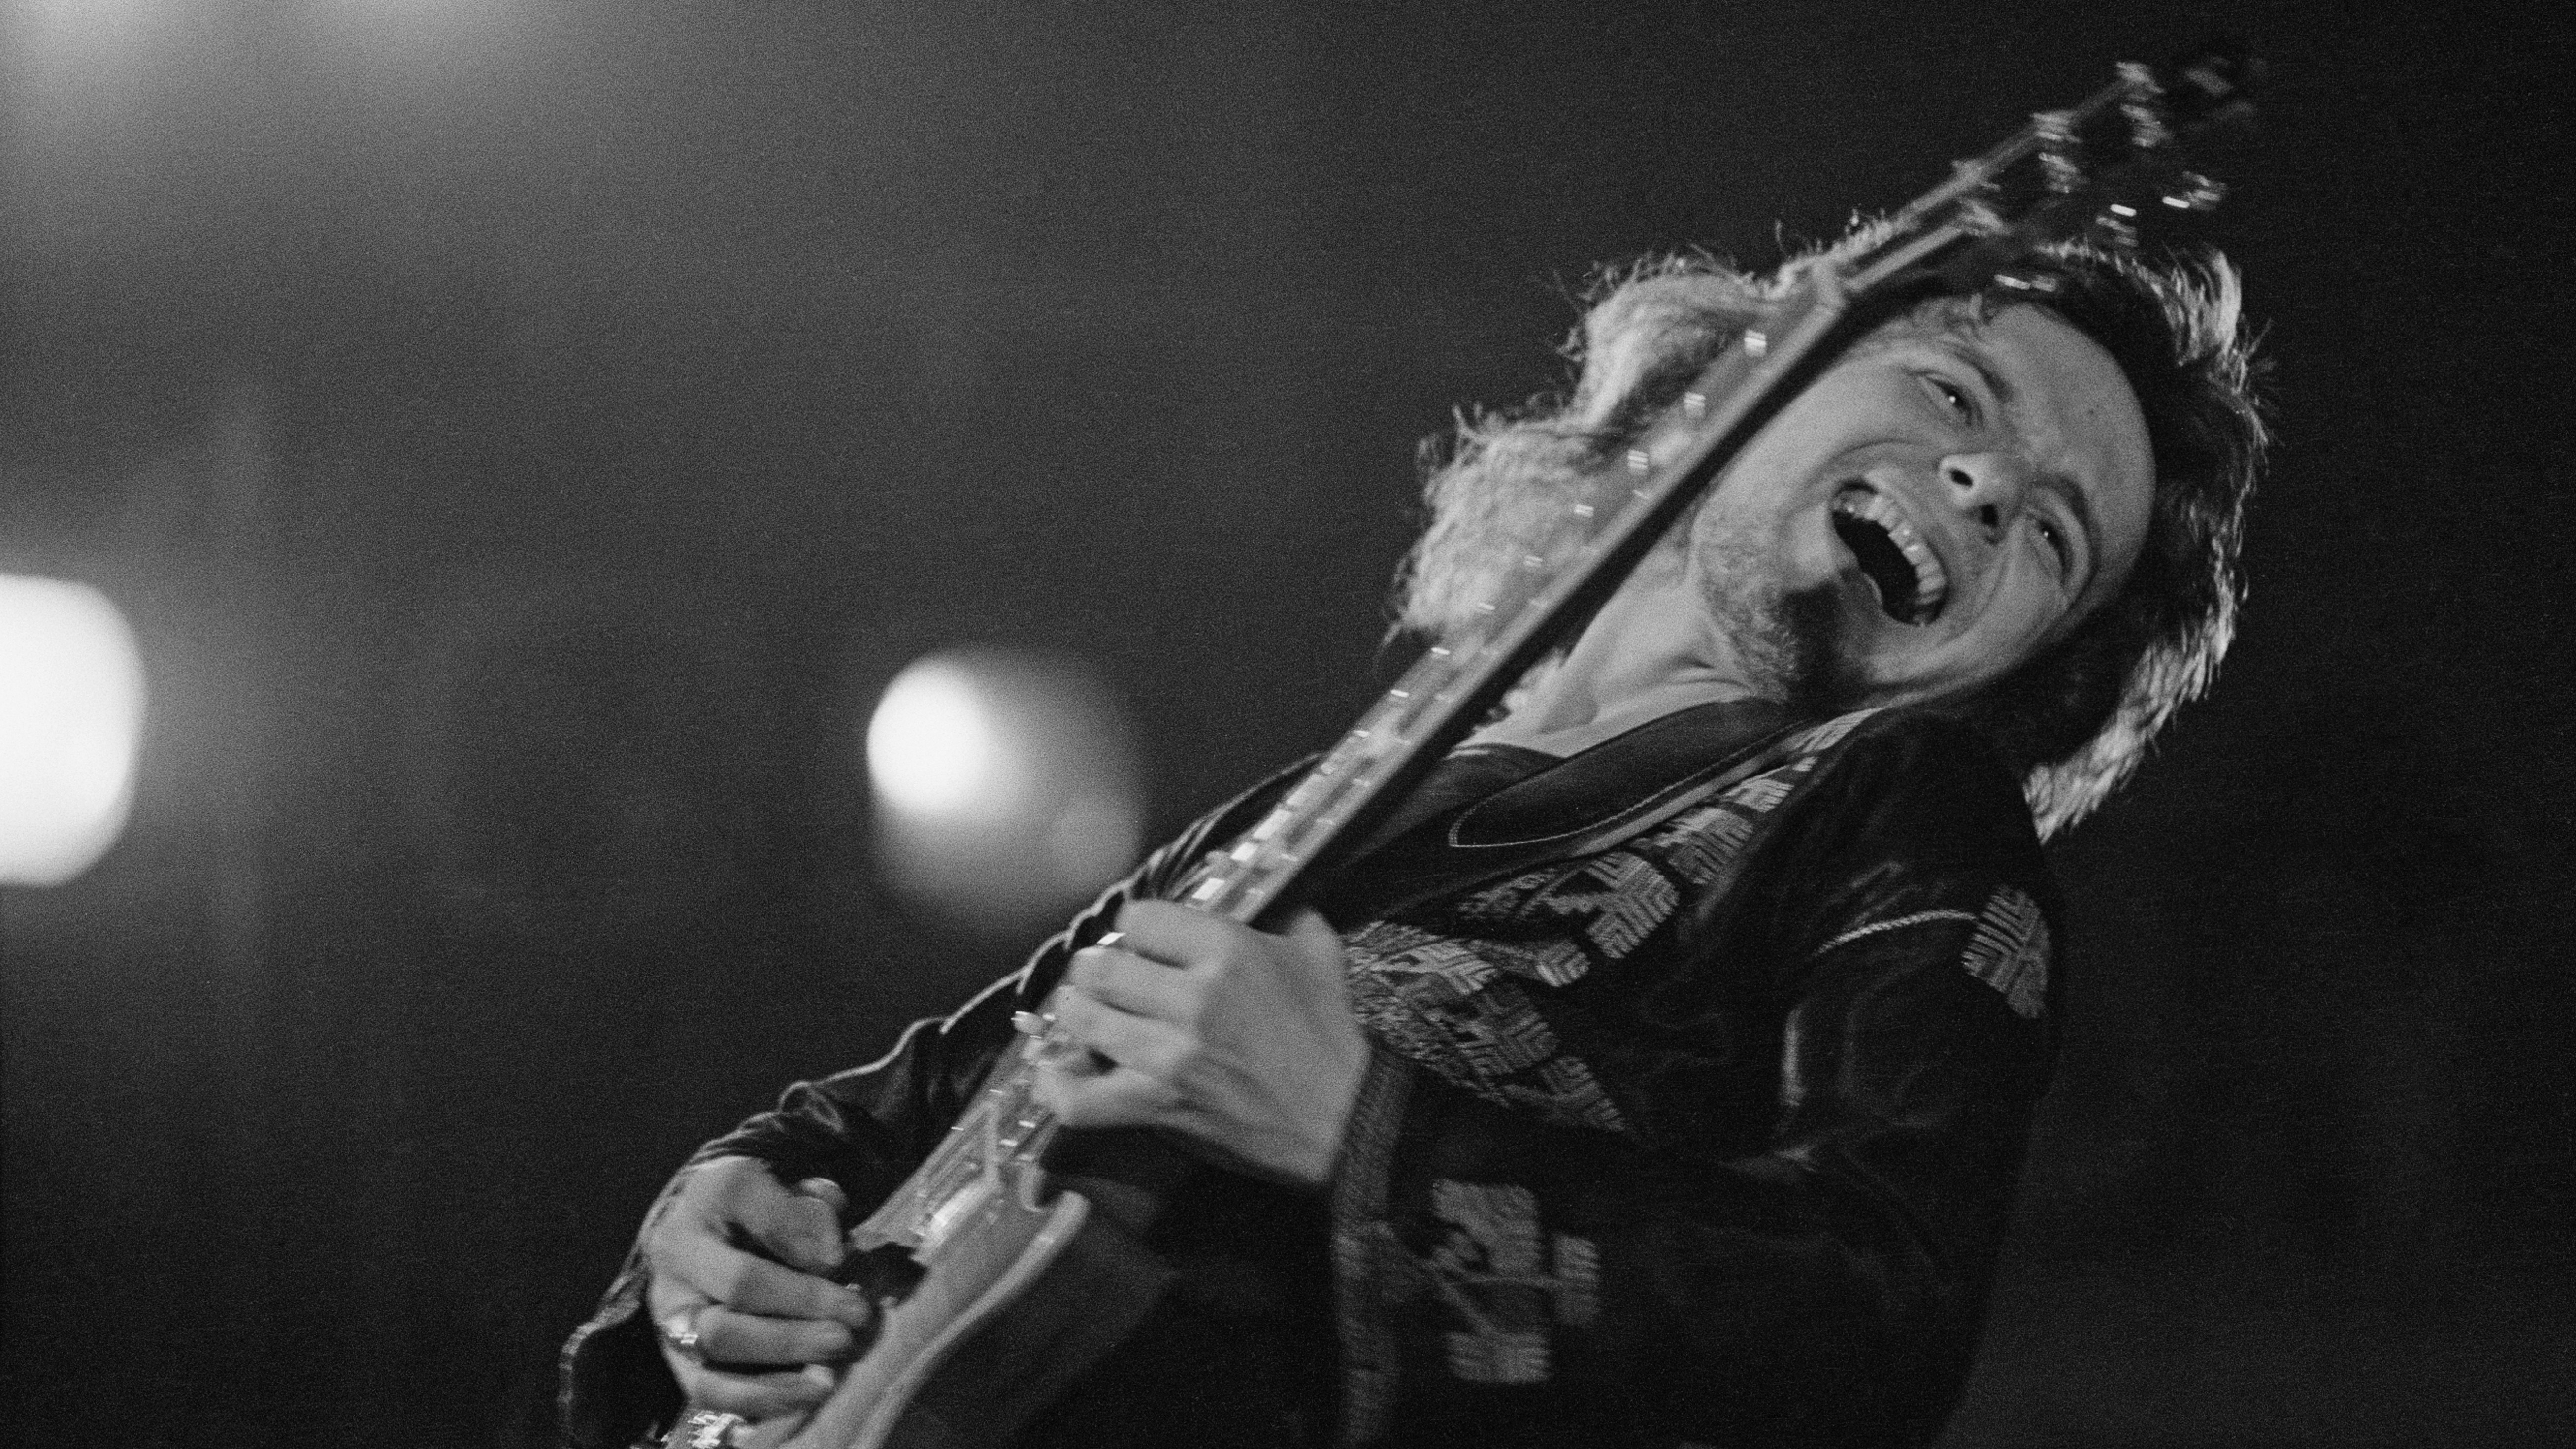 The Short Life And Tragic Death Of Paul Kossoff Louder